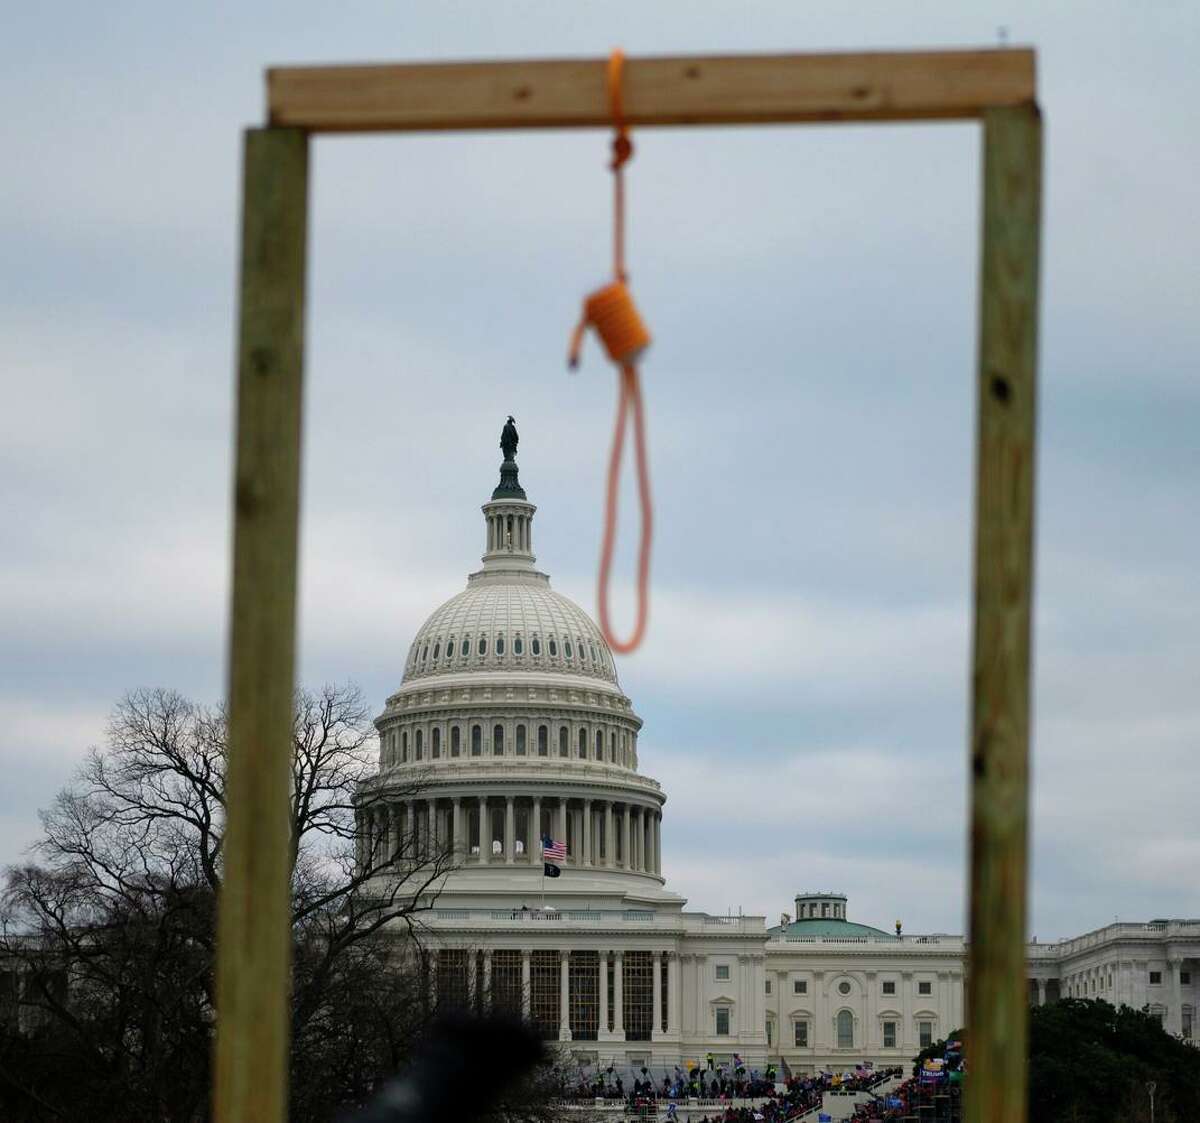 A noose hangs on a makeshift gallows outside the U.S. Capitol on Jan. 6, 2021. Polls show 71% of Republicans now view Biden’s election as illegitimate. Nearly as many see view the Capitol insurrectionists as lawful “protesters.”